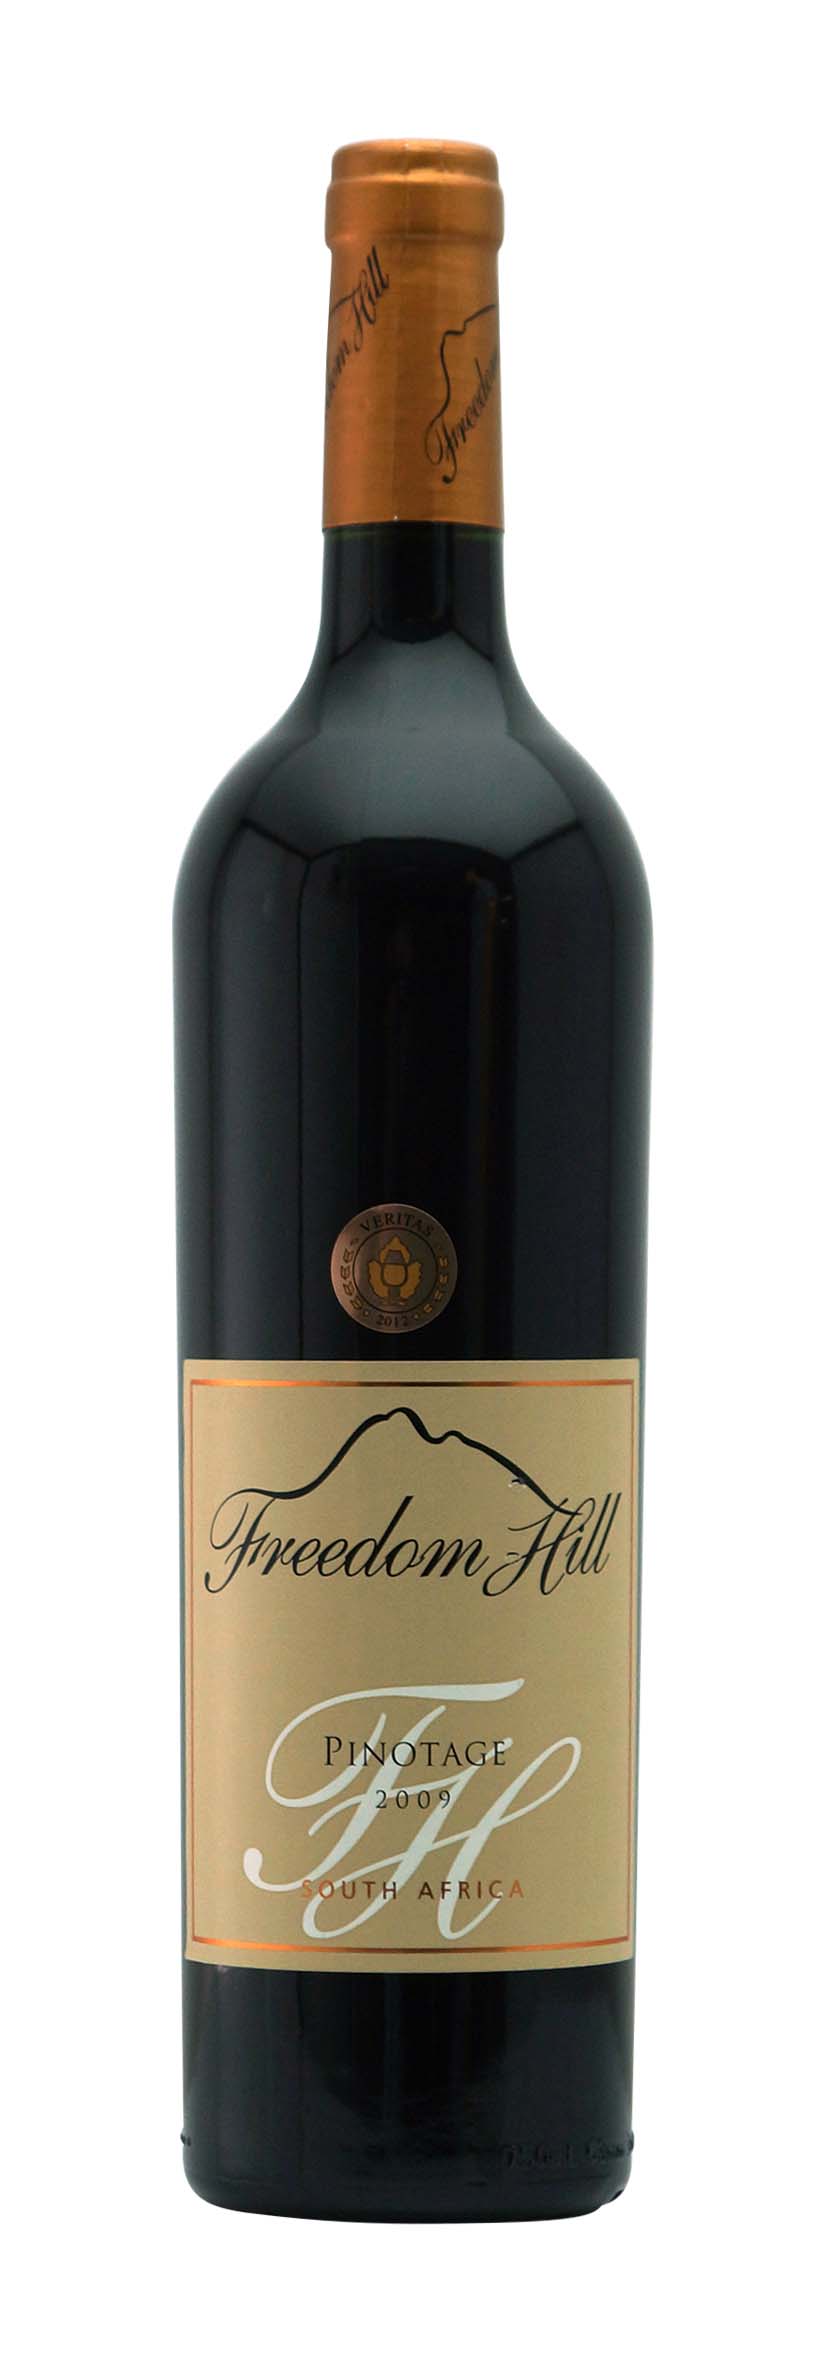 Paarl Freedom Hill Pinotage 2009